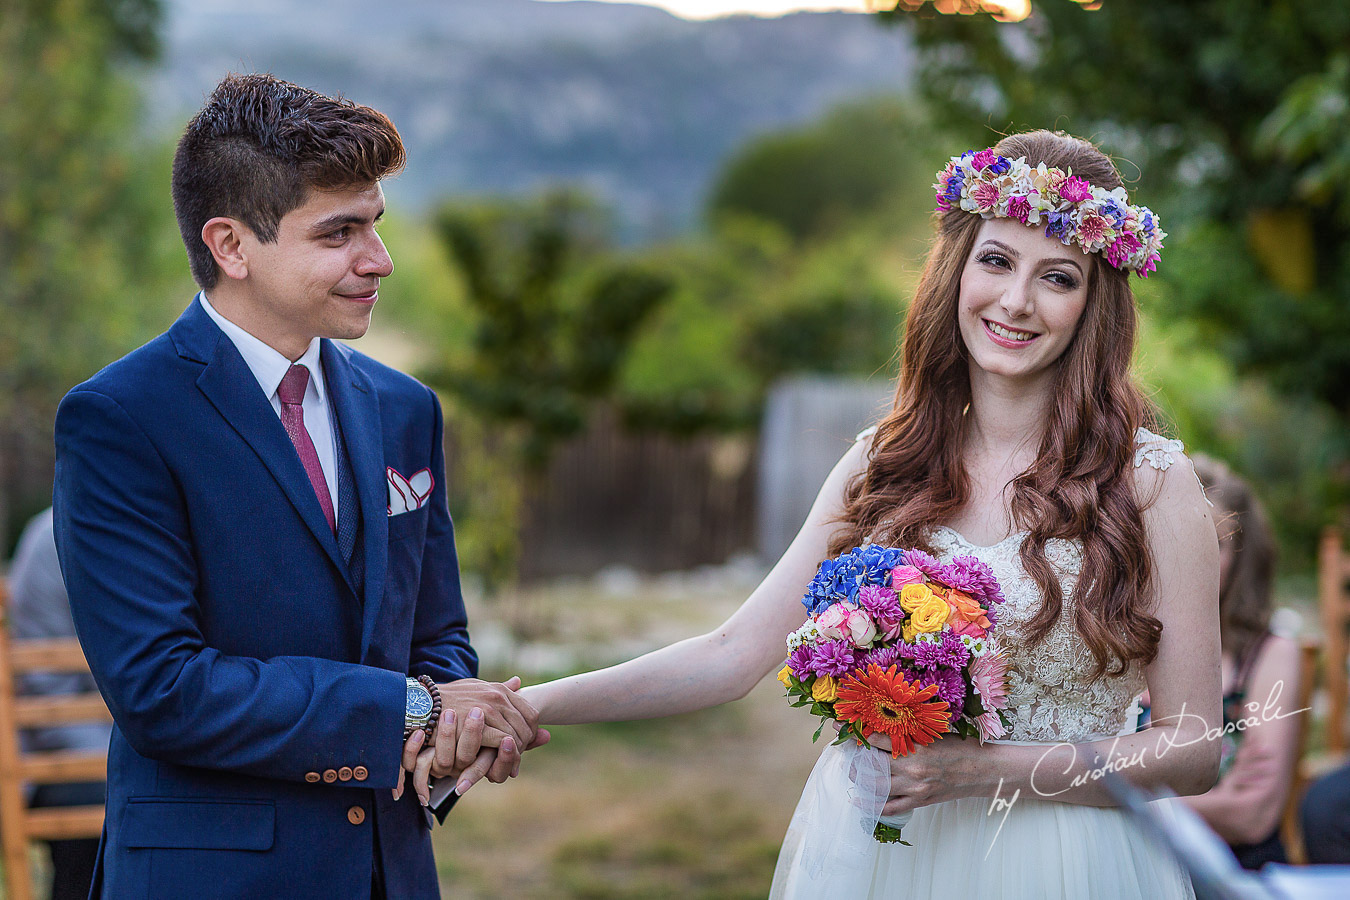 Emotional moments captured at a beautiful bohemian wedding in Trimiklini, Cyprus.